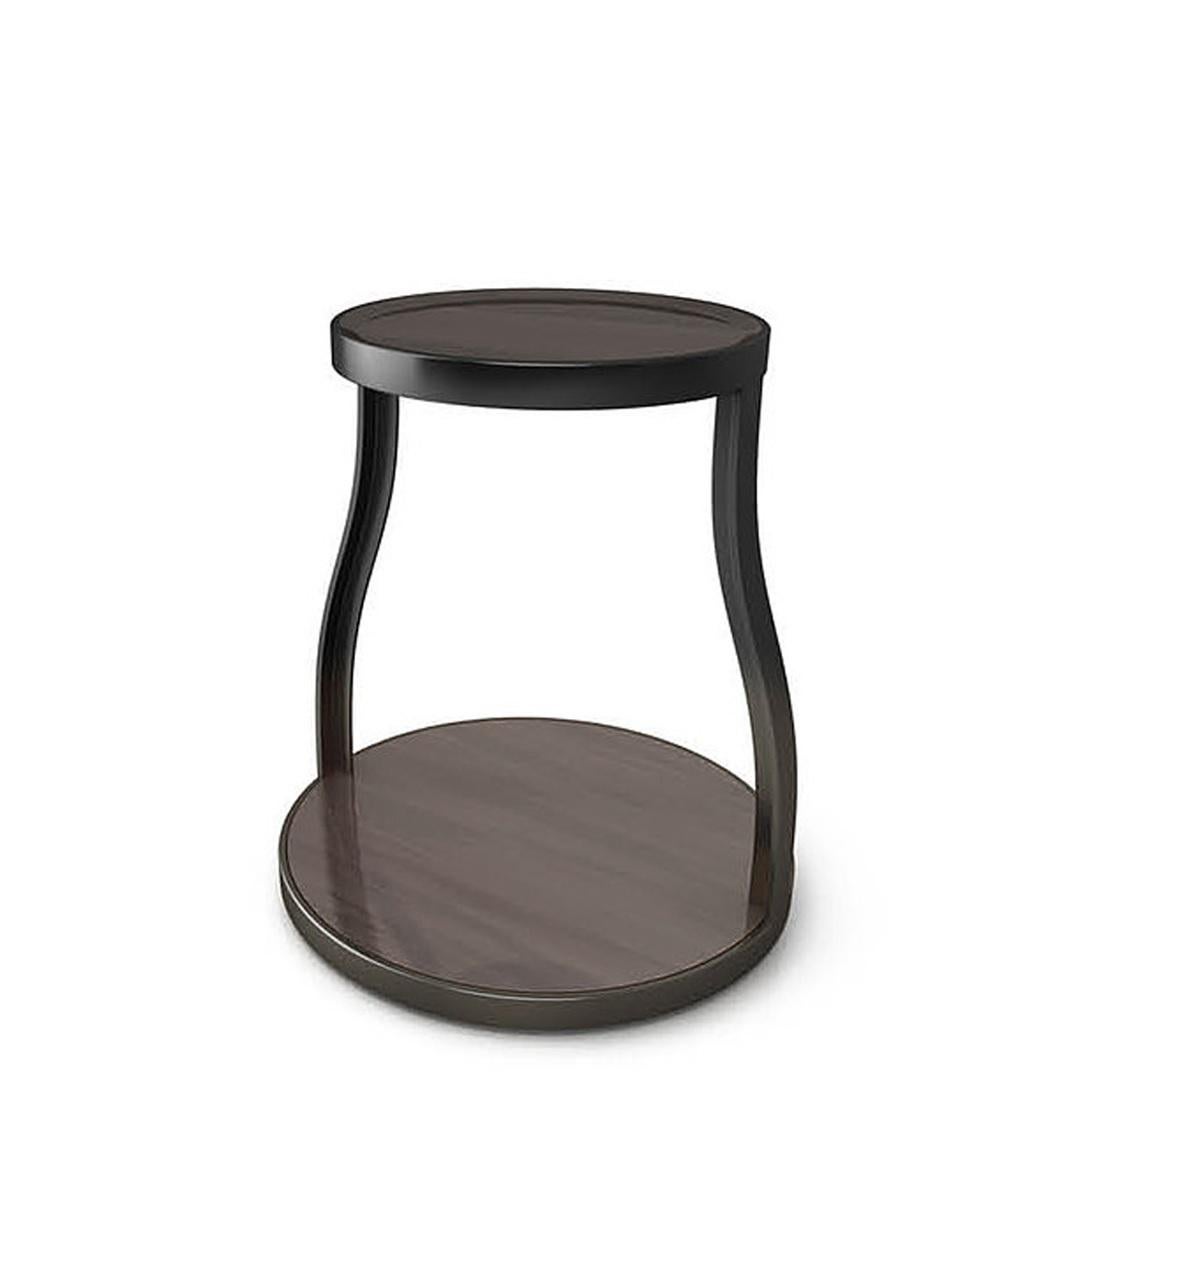 Axel side table by LK Edition
Dimensions: Diameter 42 x height 55 cm 
Materials: Walnut with a glossy varnish and, black metal. 

It is with the sense of detail and requirement, this research of the exception by the selection of noble materials